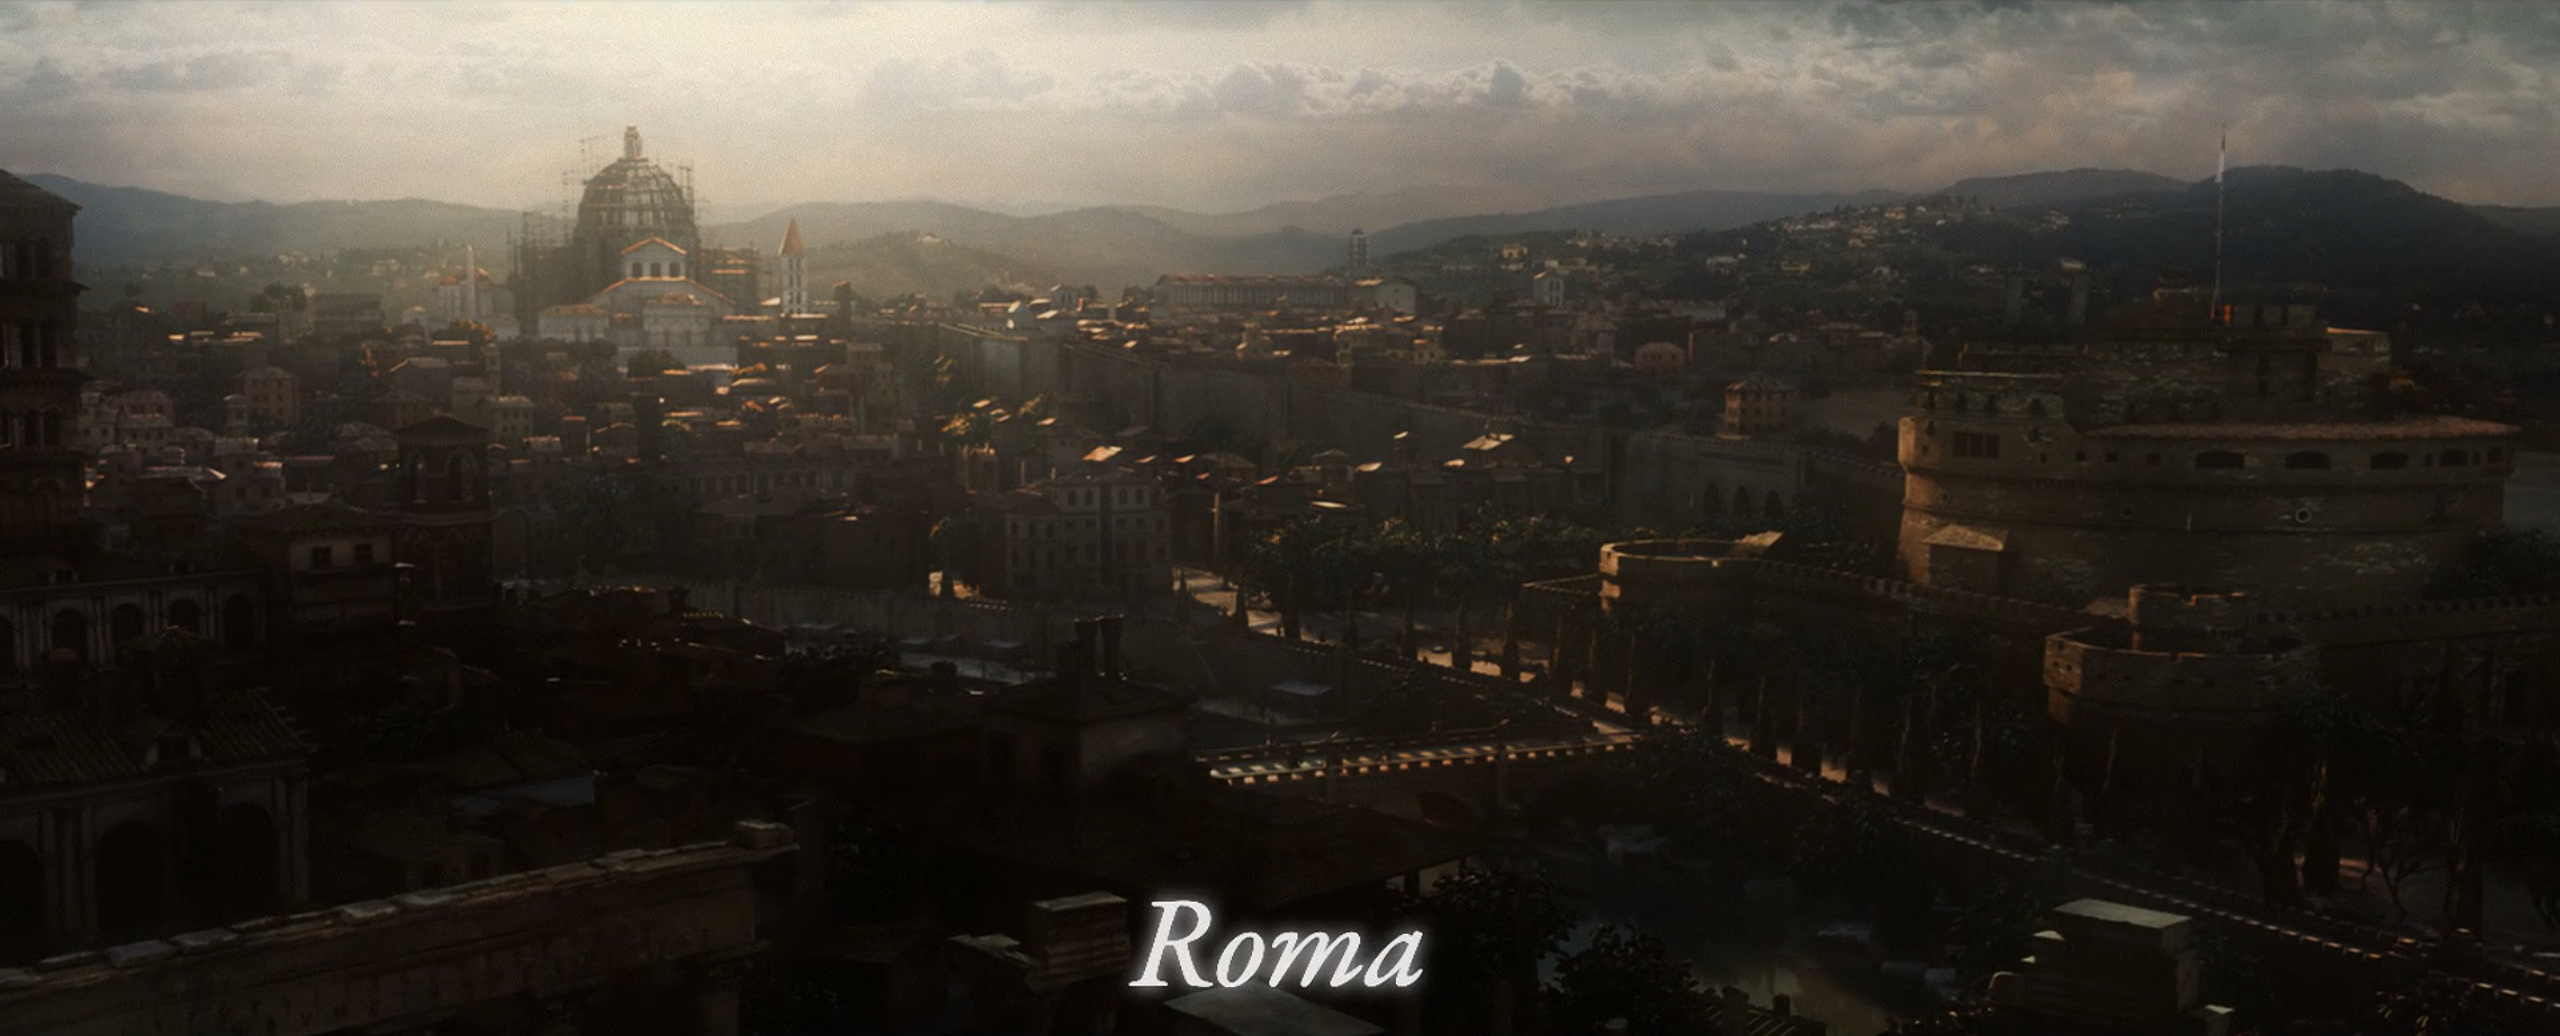 assassin creed brotherhood when in rome